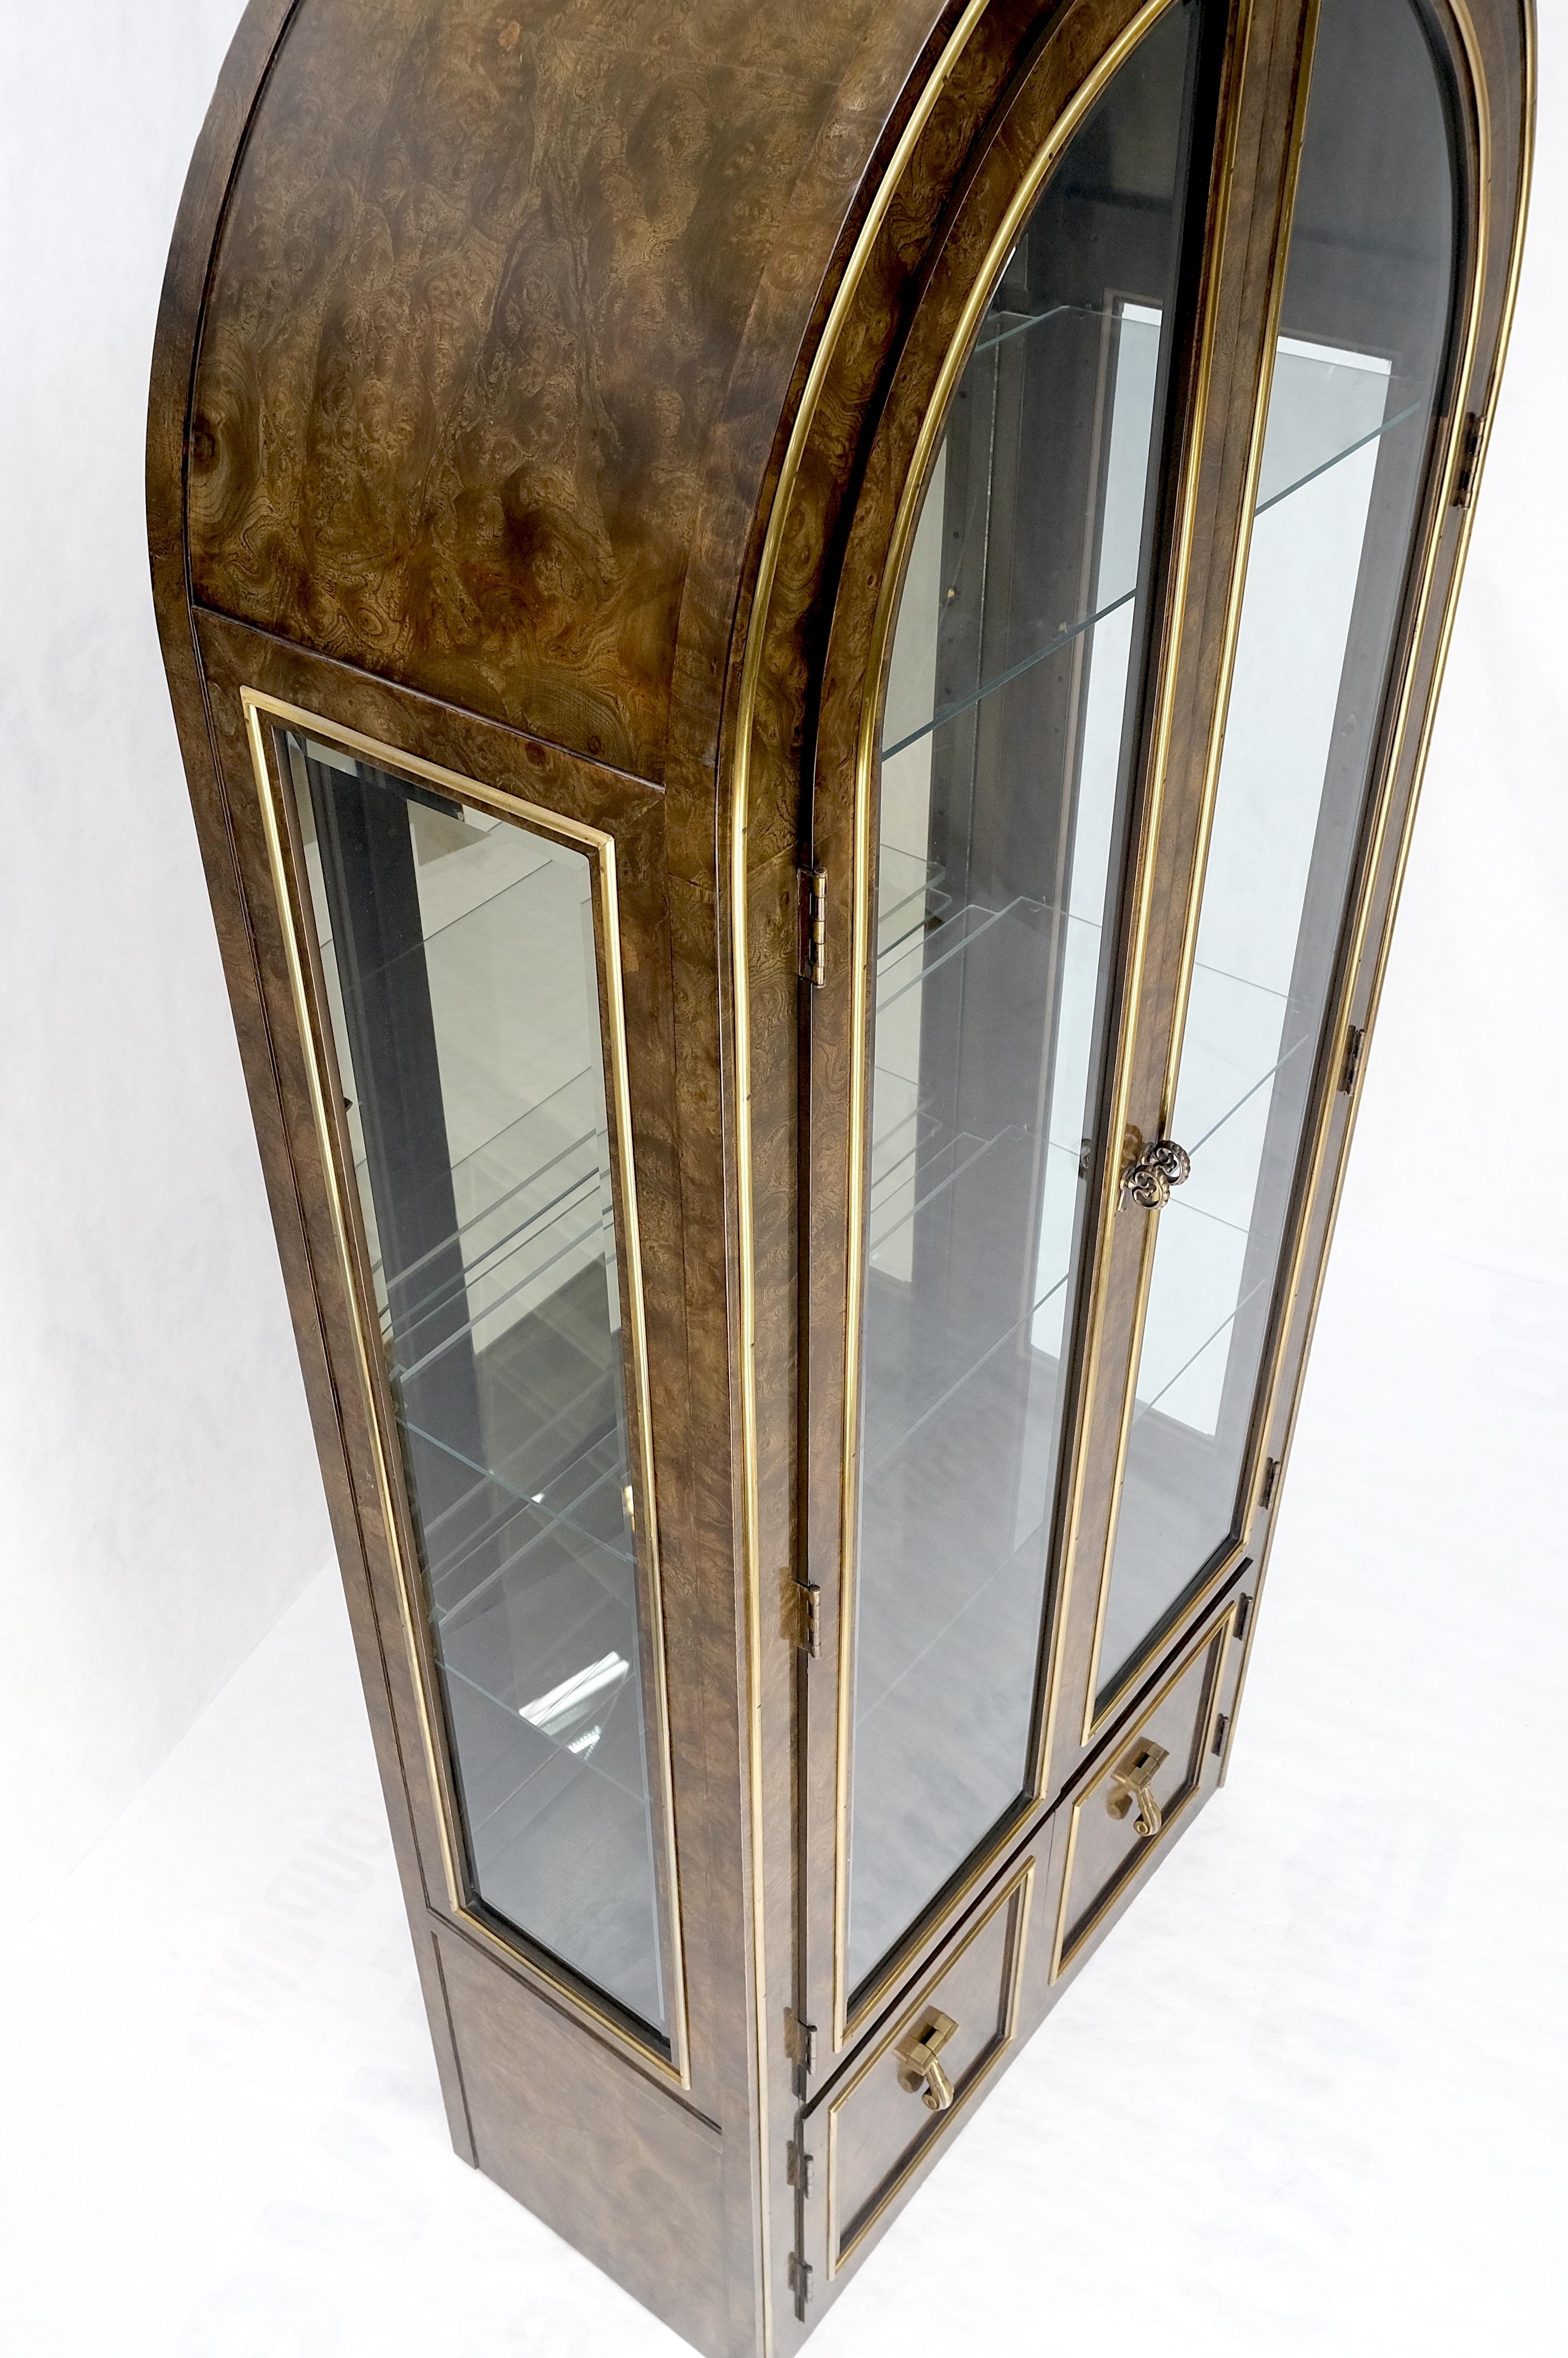 Pair Mastercraft Dome Shape Burl Wood Curio Display Cabinets w Shelves Lights In Good Condition For Sale In Rockaway, NJ